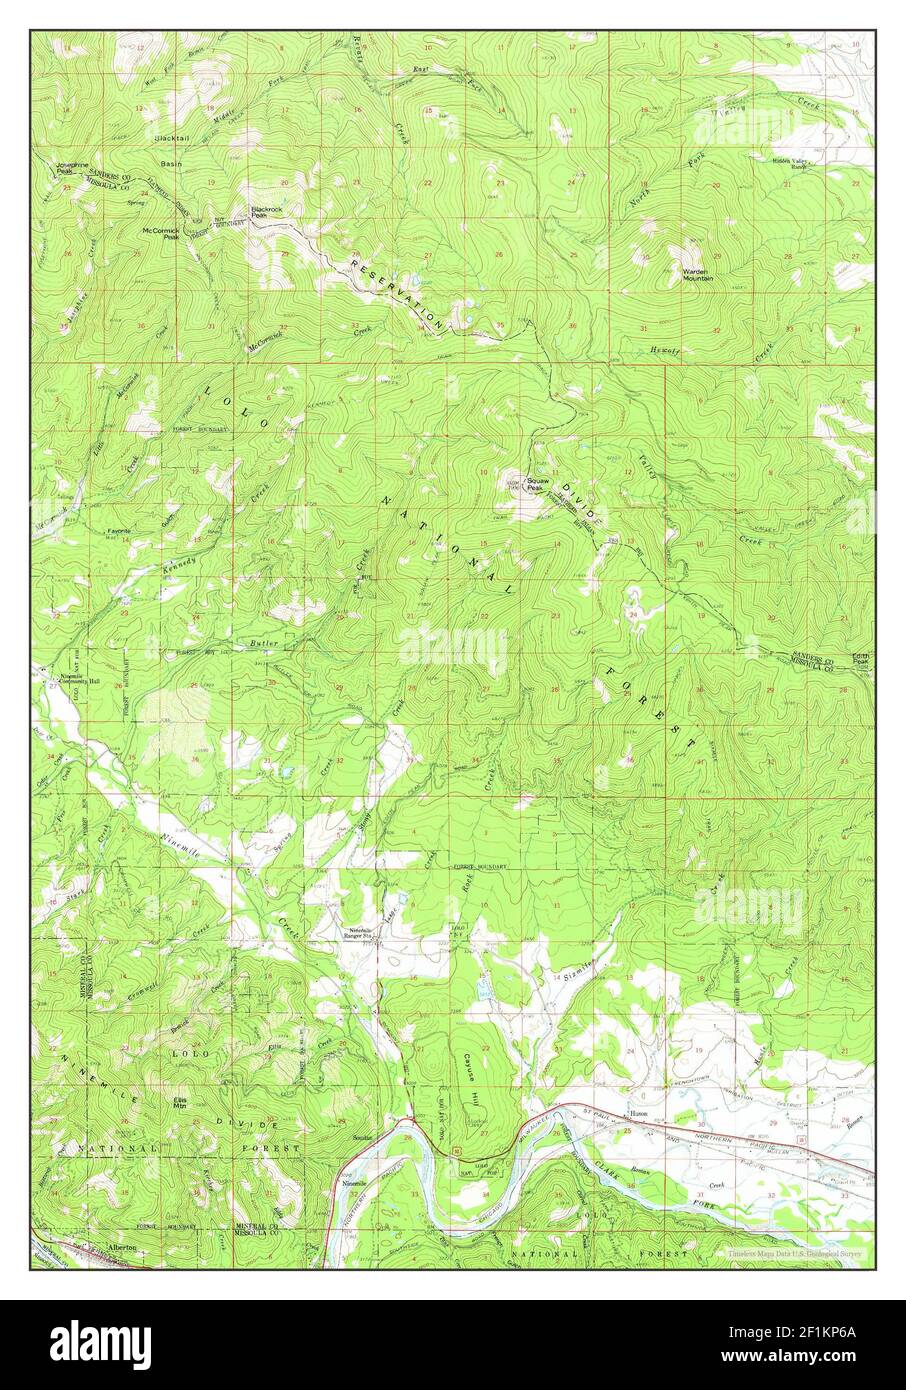 Alberton, Montana, map 1959, 1:62500, United States of America by Timeless Maps, data U.S. Geological Survey Stock Photo